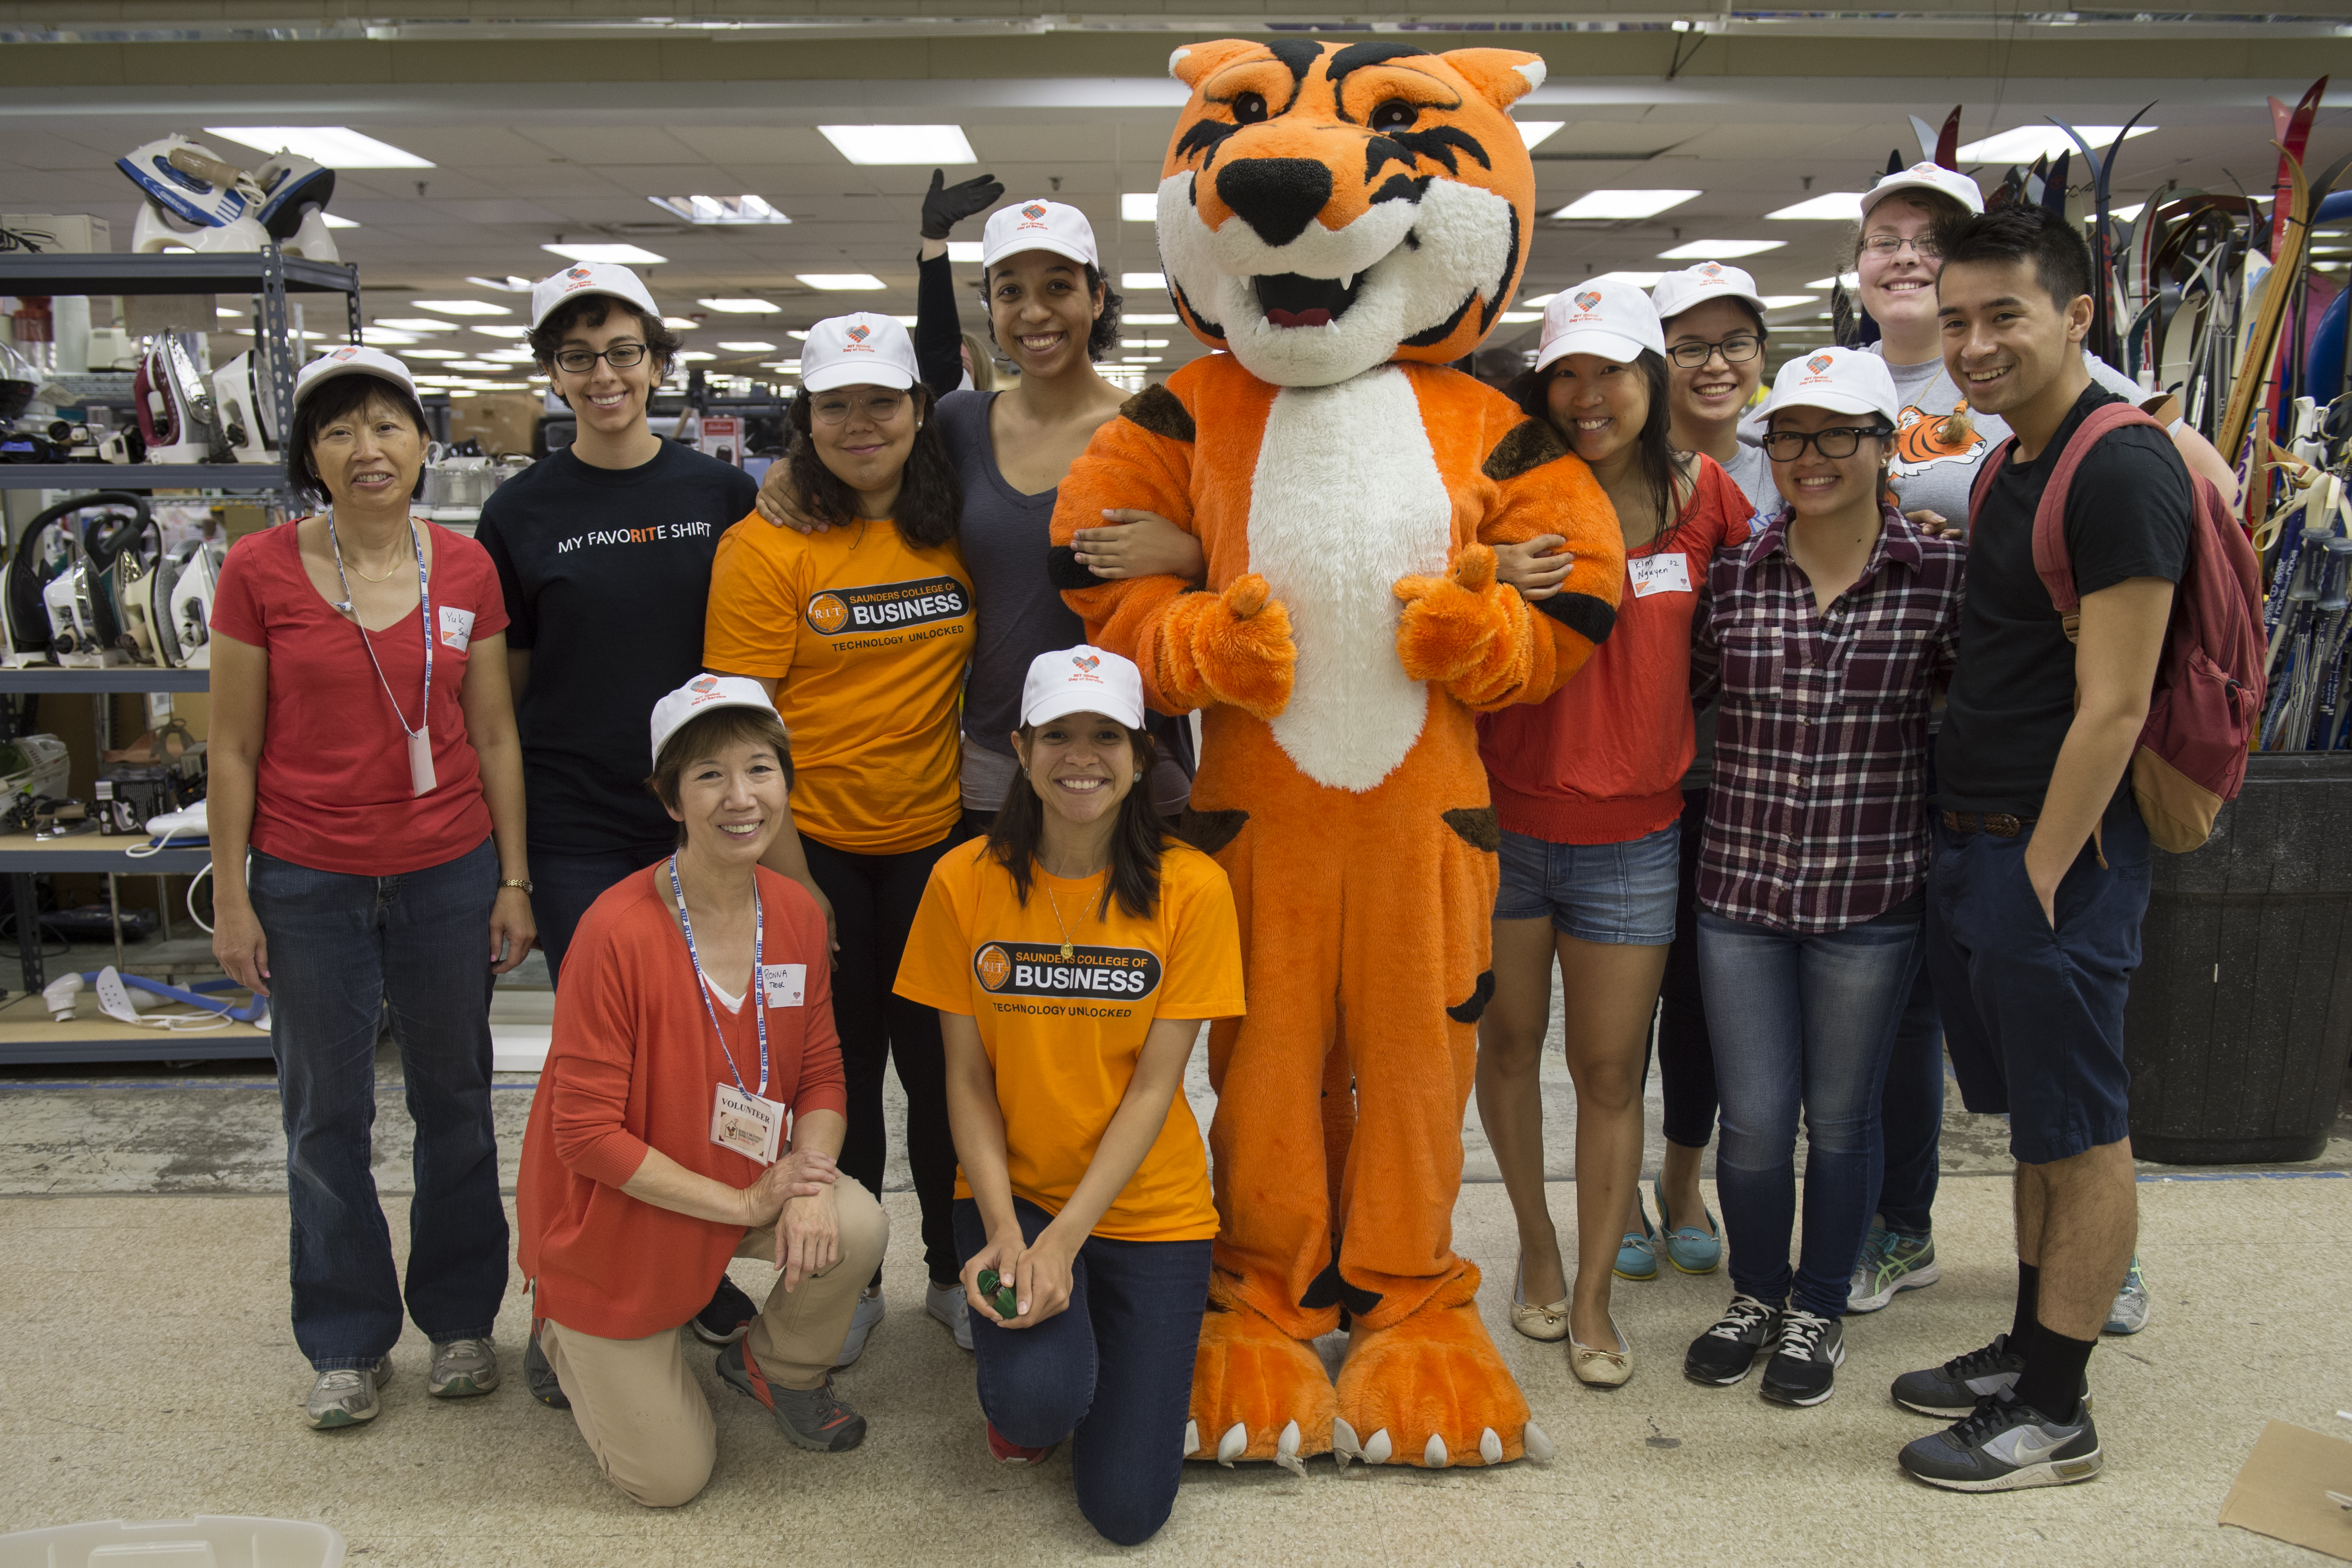 RIT Mascot Ritchie with people